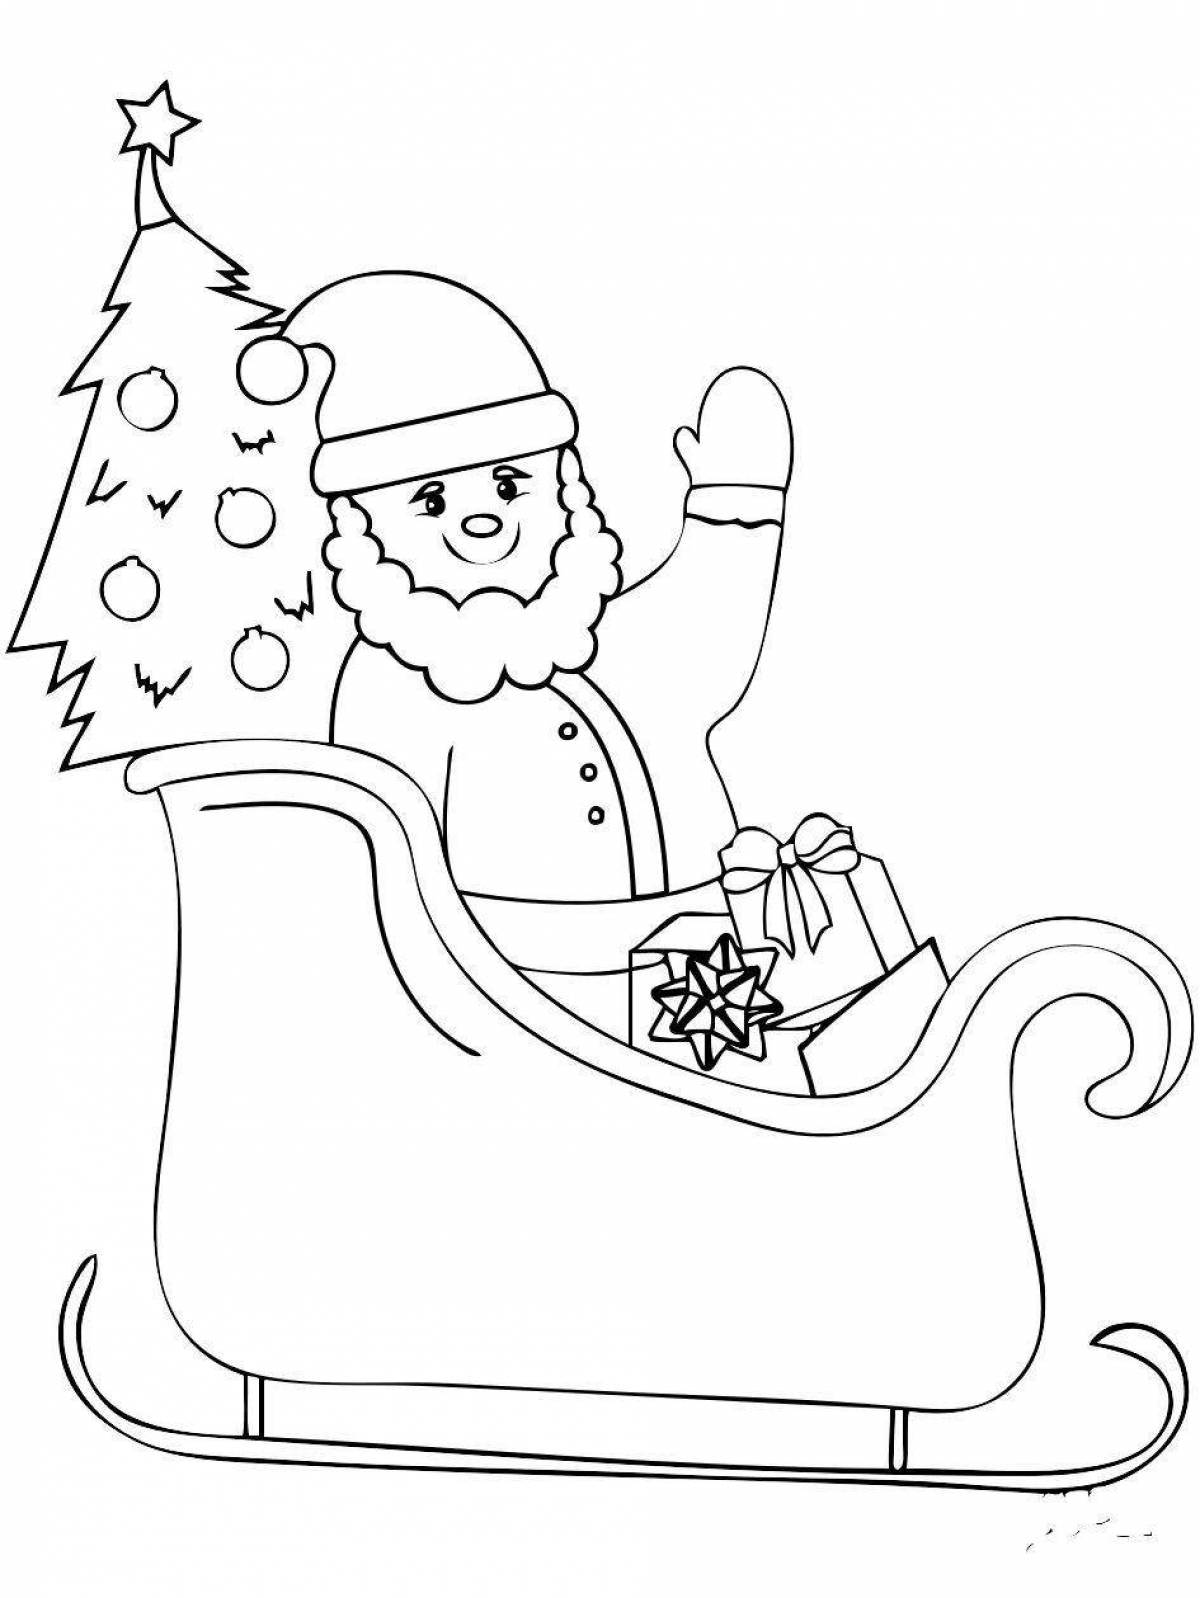 Coloring page elegant santa claus on a sleigh